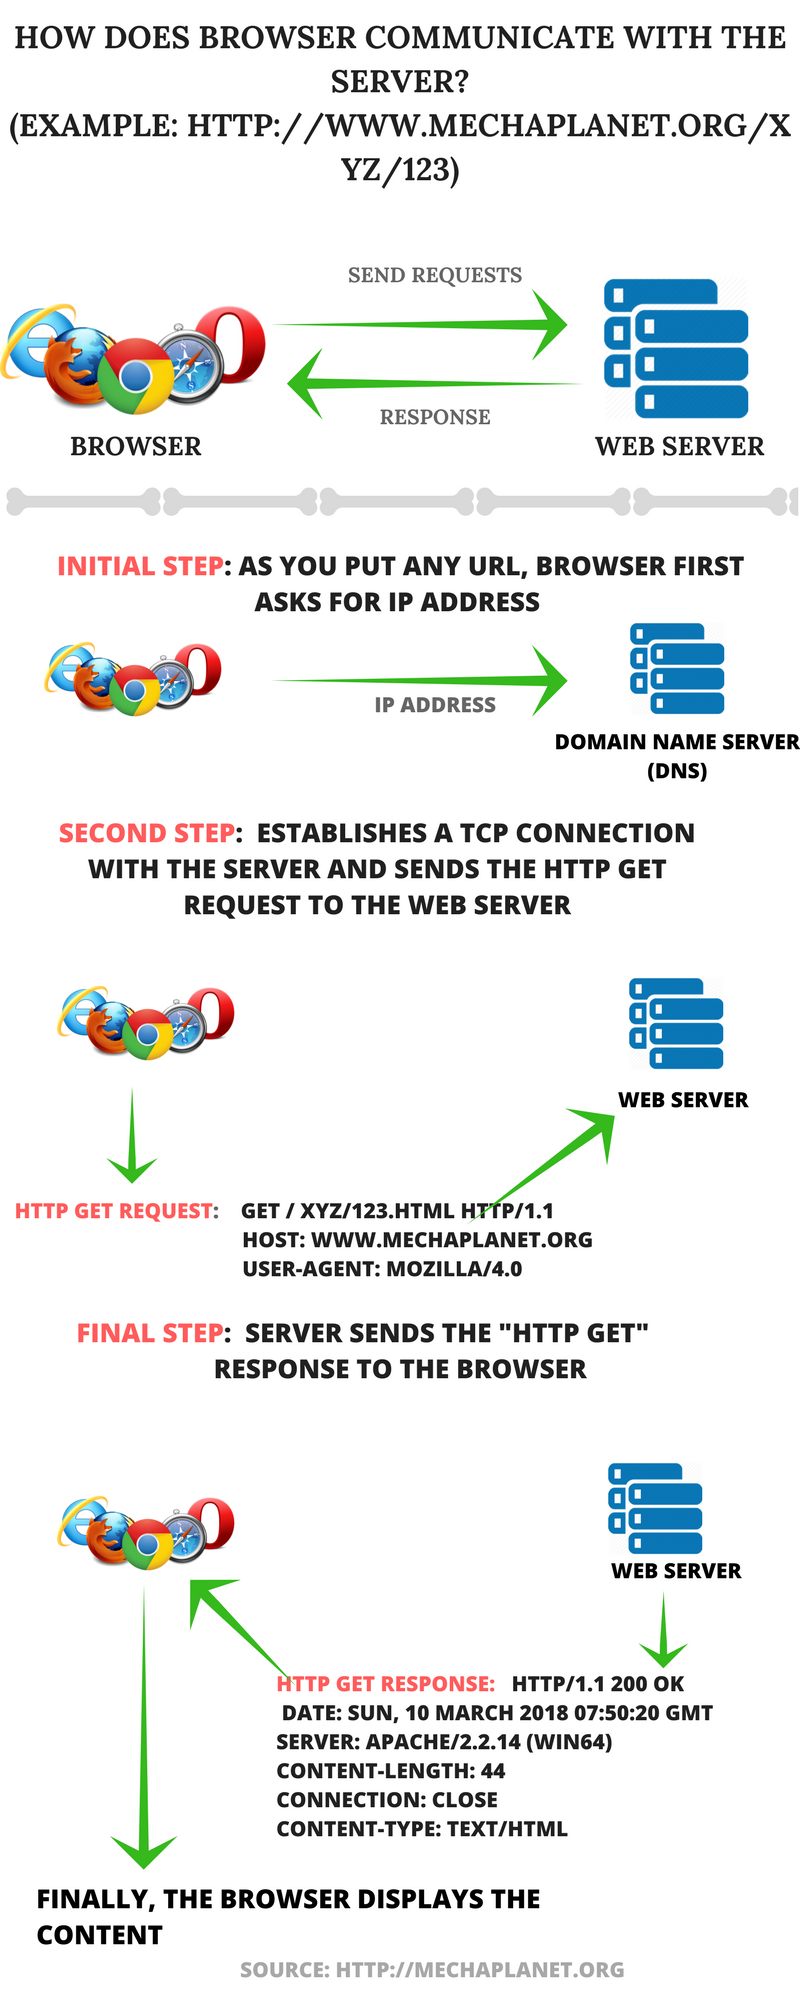 How Does Browser Communicate With The Server